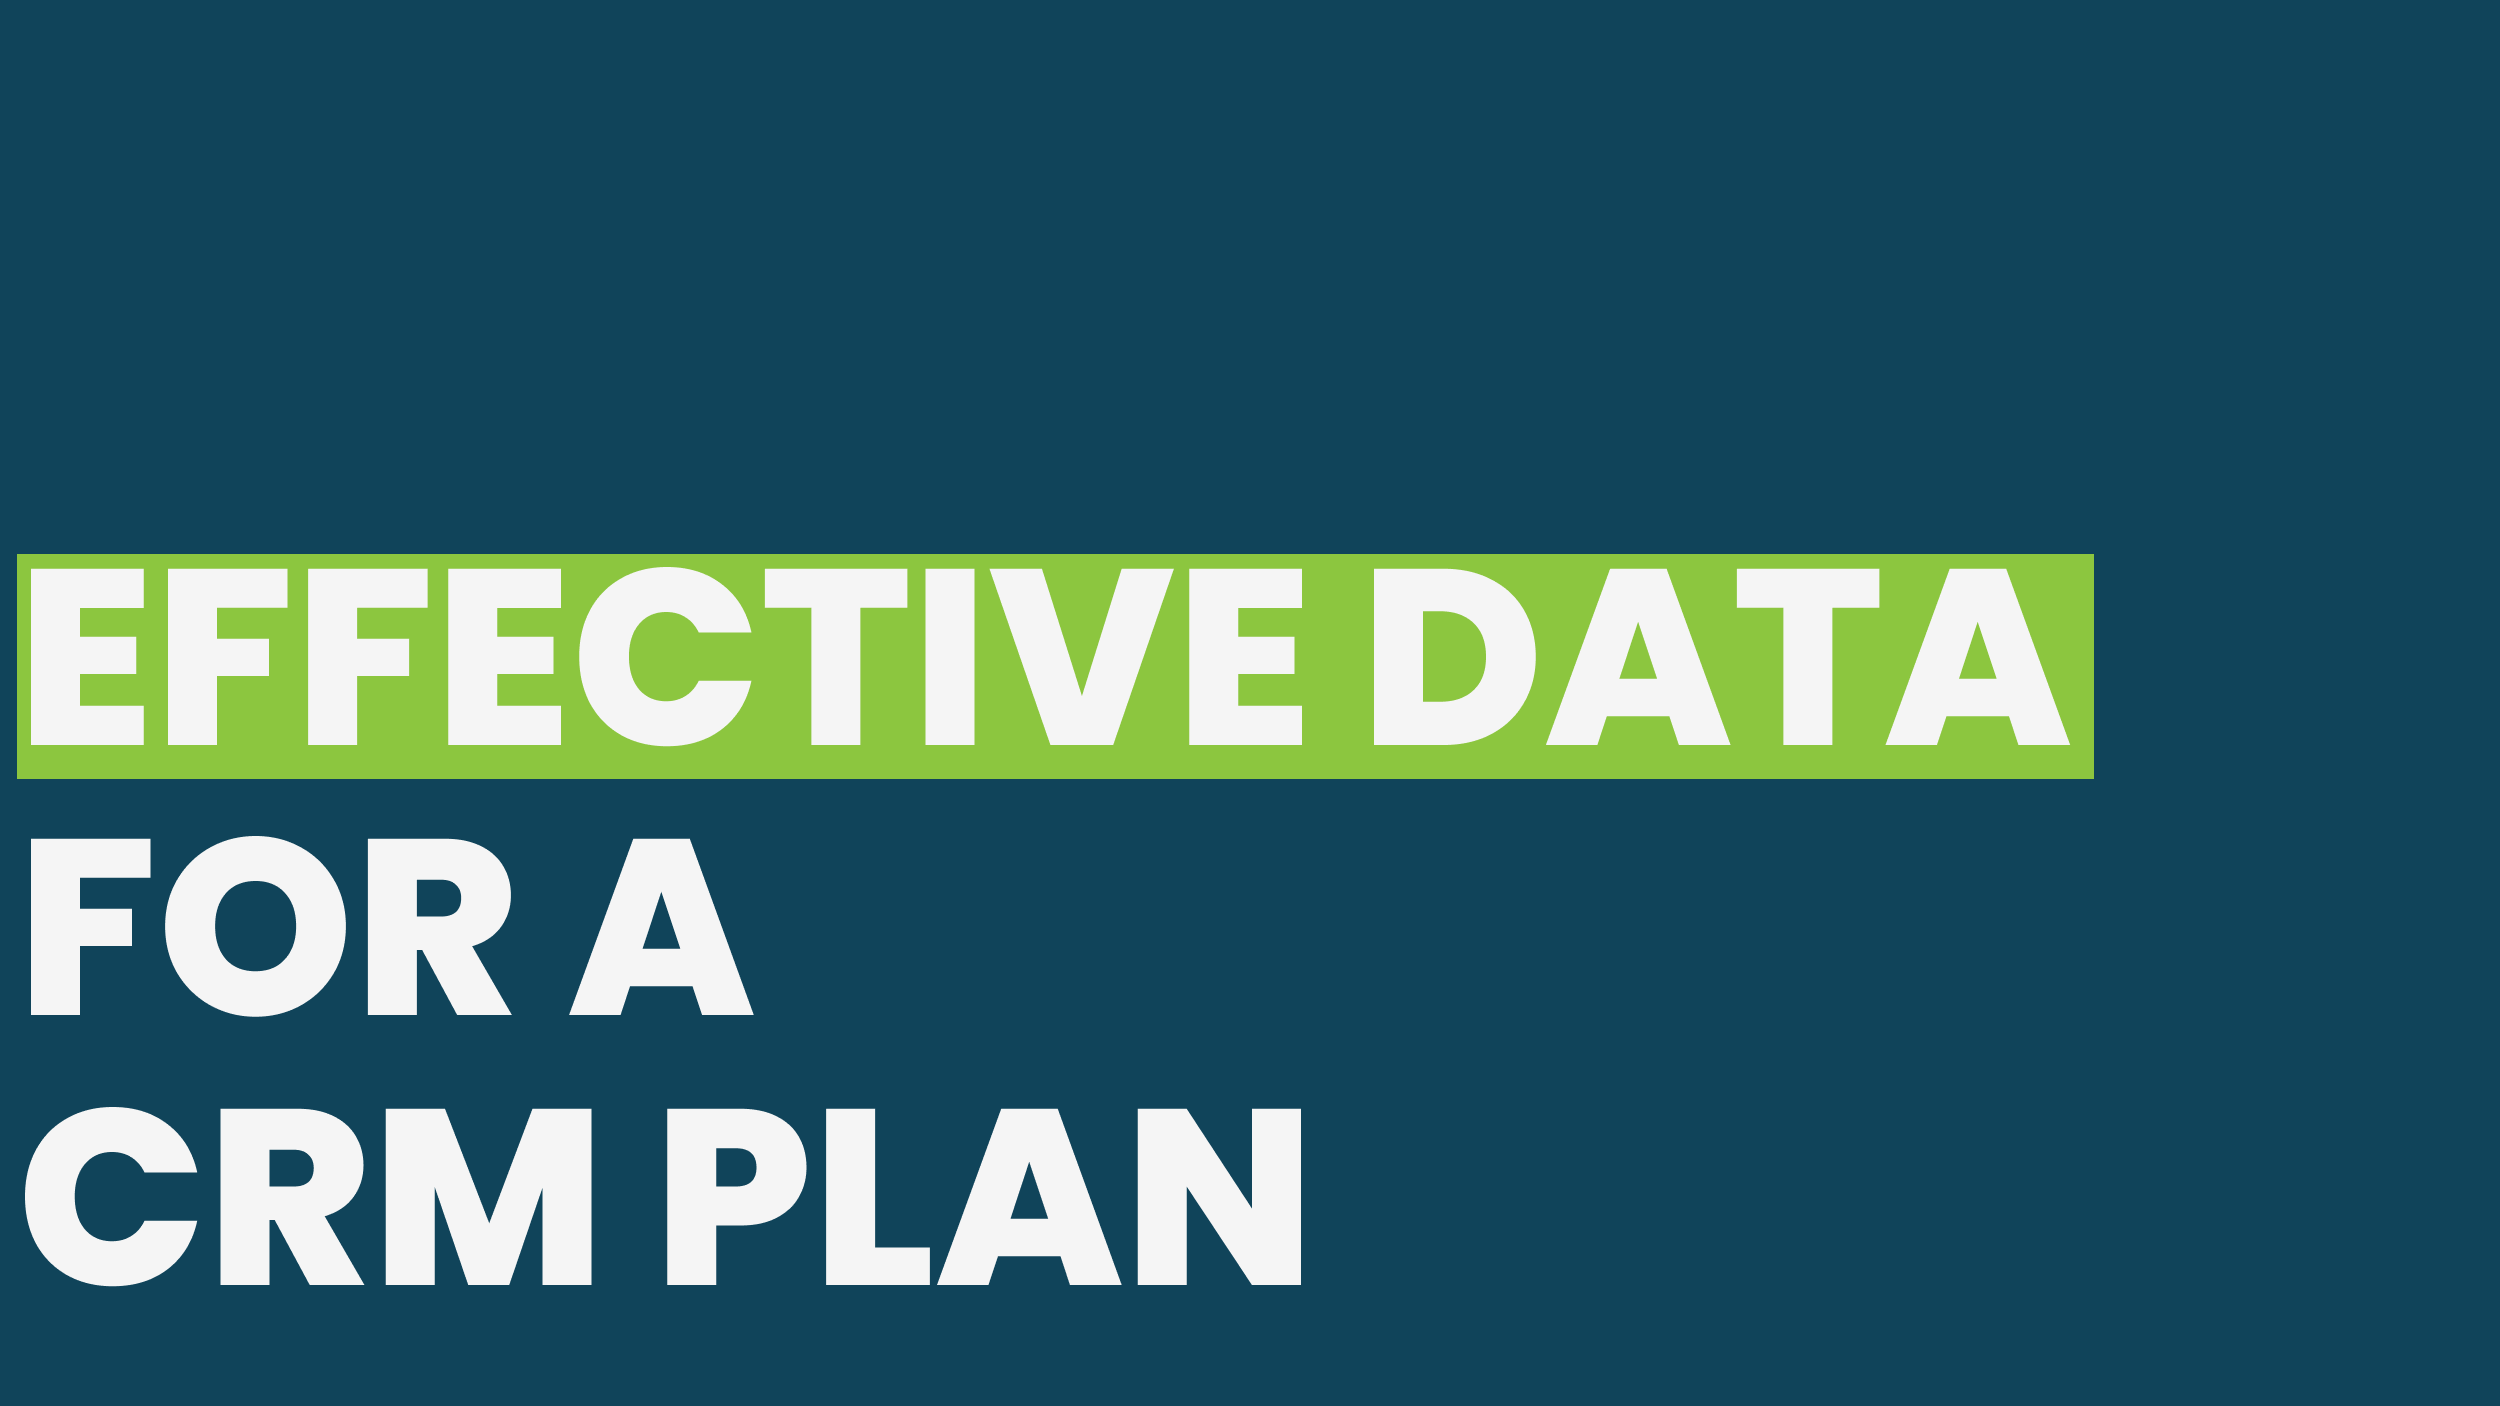 Essential data for an effective crm plan